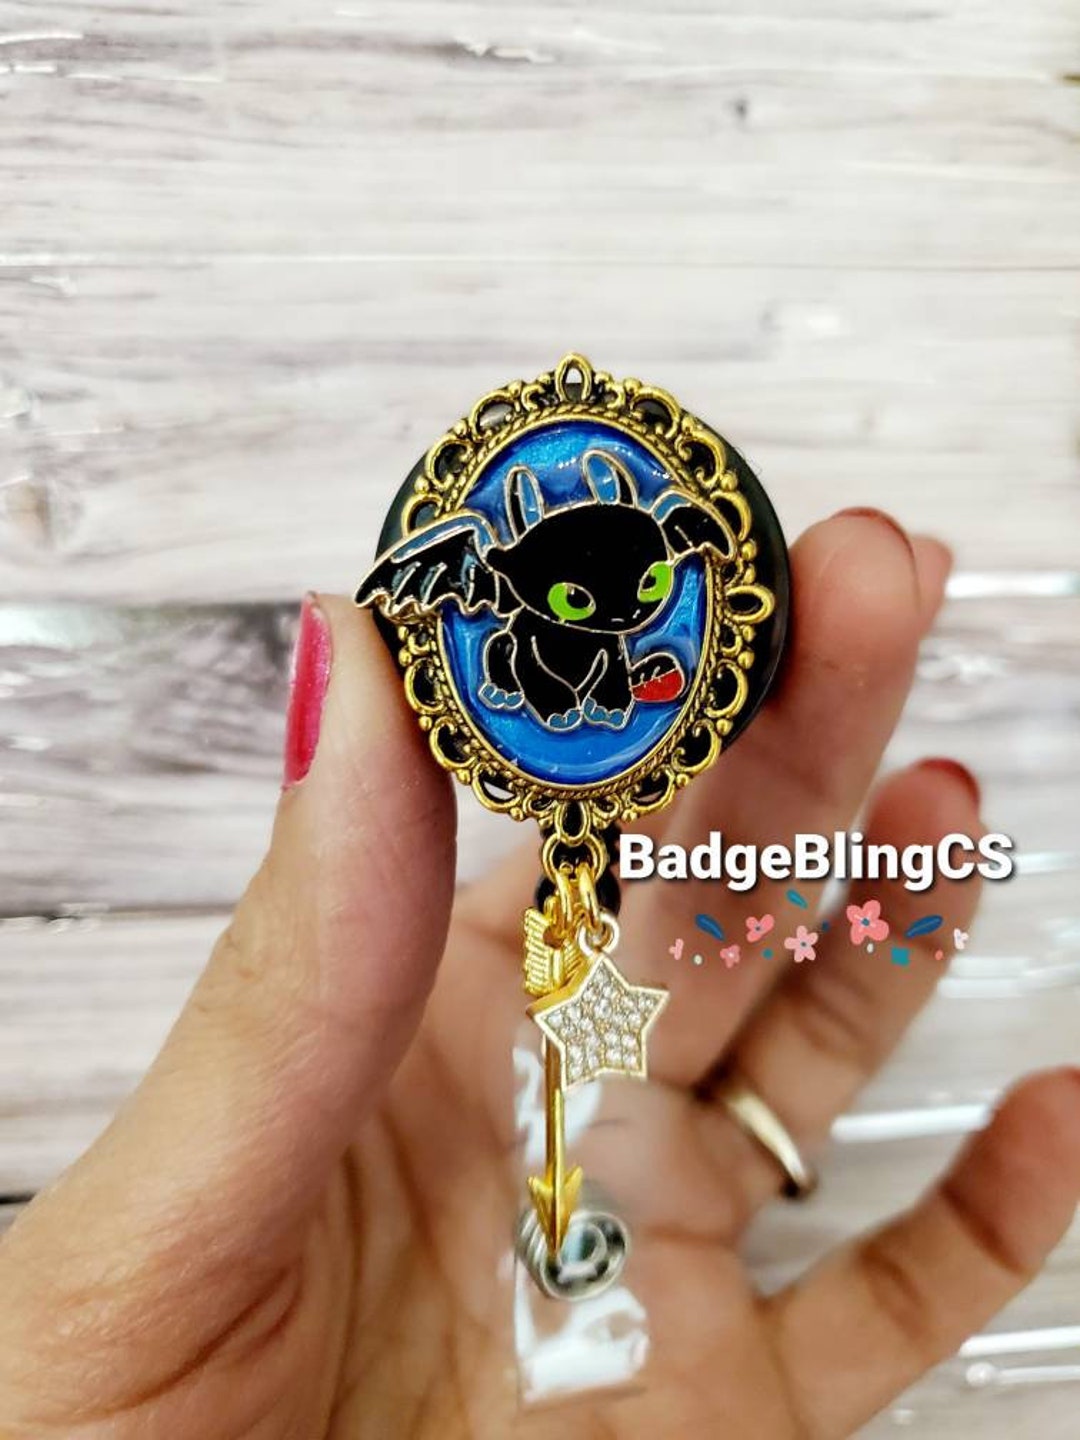 Night Dragon Badge Holder Reel Clip Train Your Dragon Inspired Diamond Charm  Medical Caduceus Proud to Be a Nurse Name Card Fury Tooth Less 